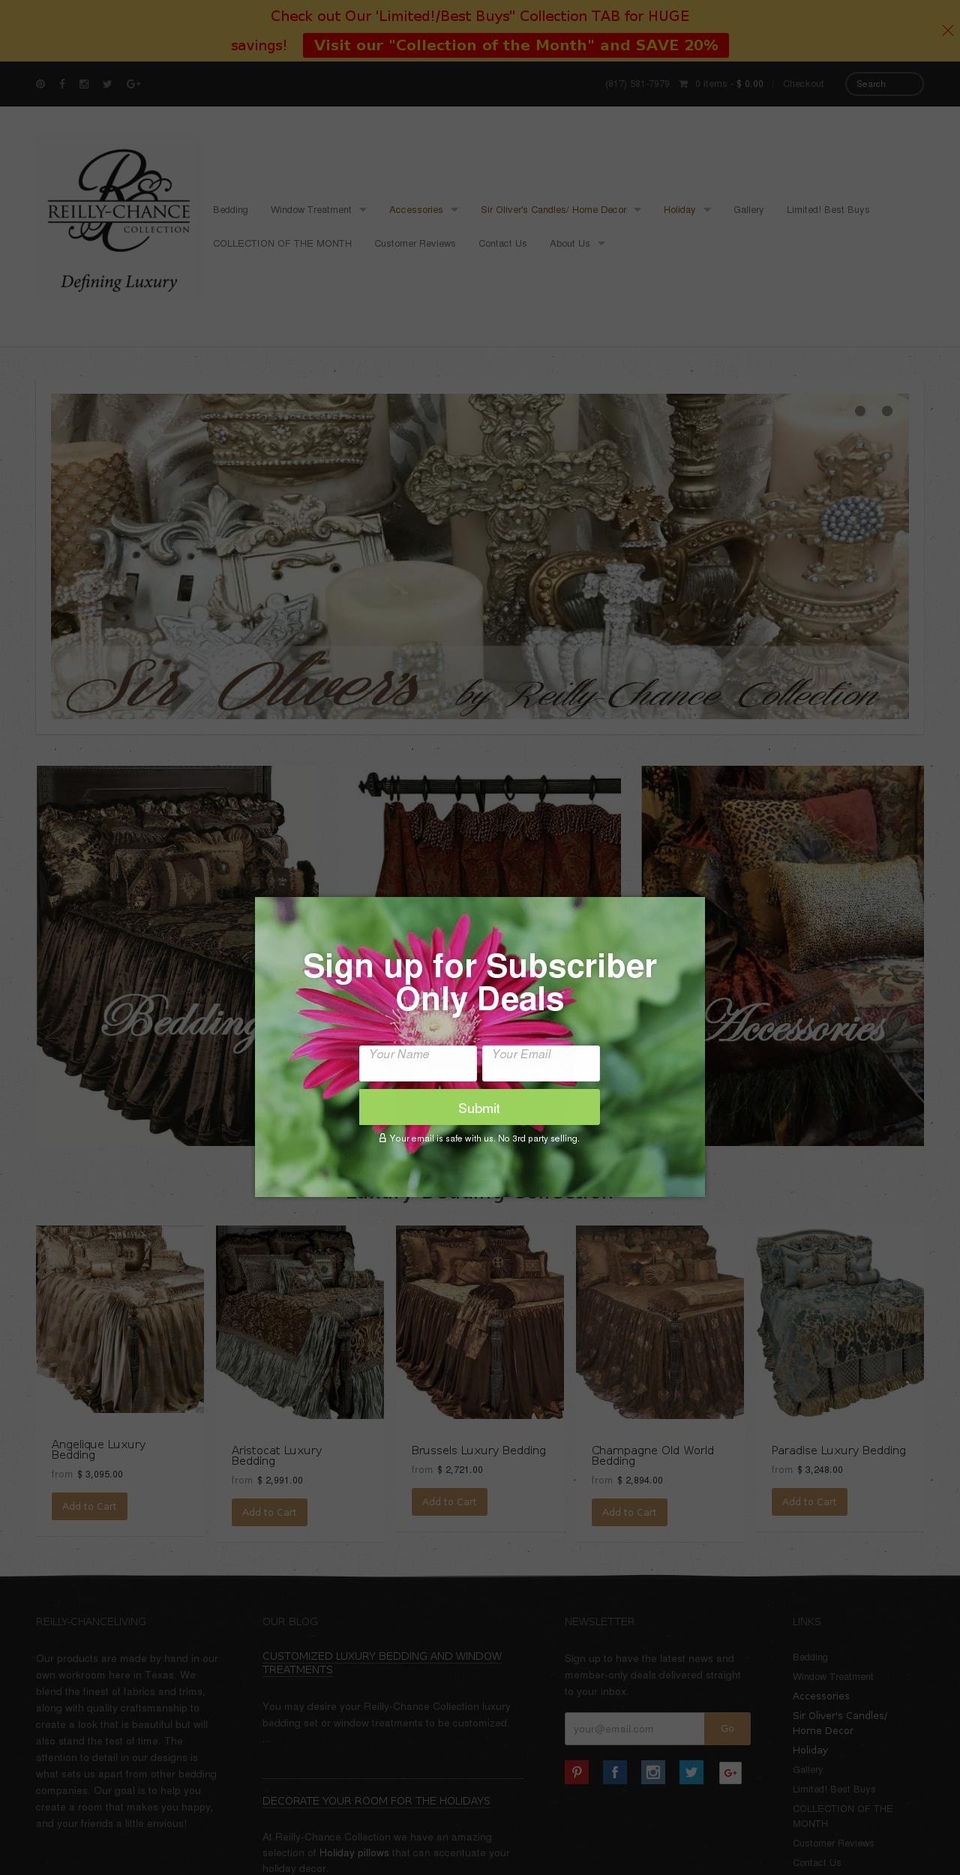 Goodwin Shopify theme site example reilly-chanceliving.com